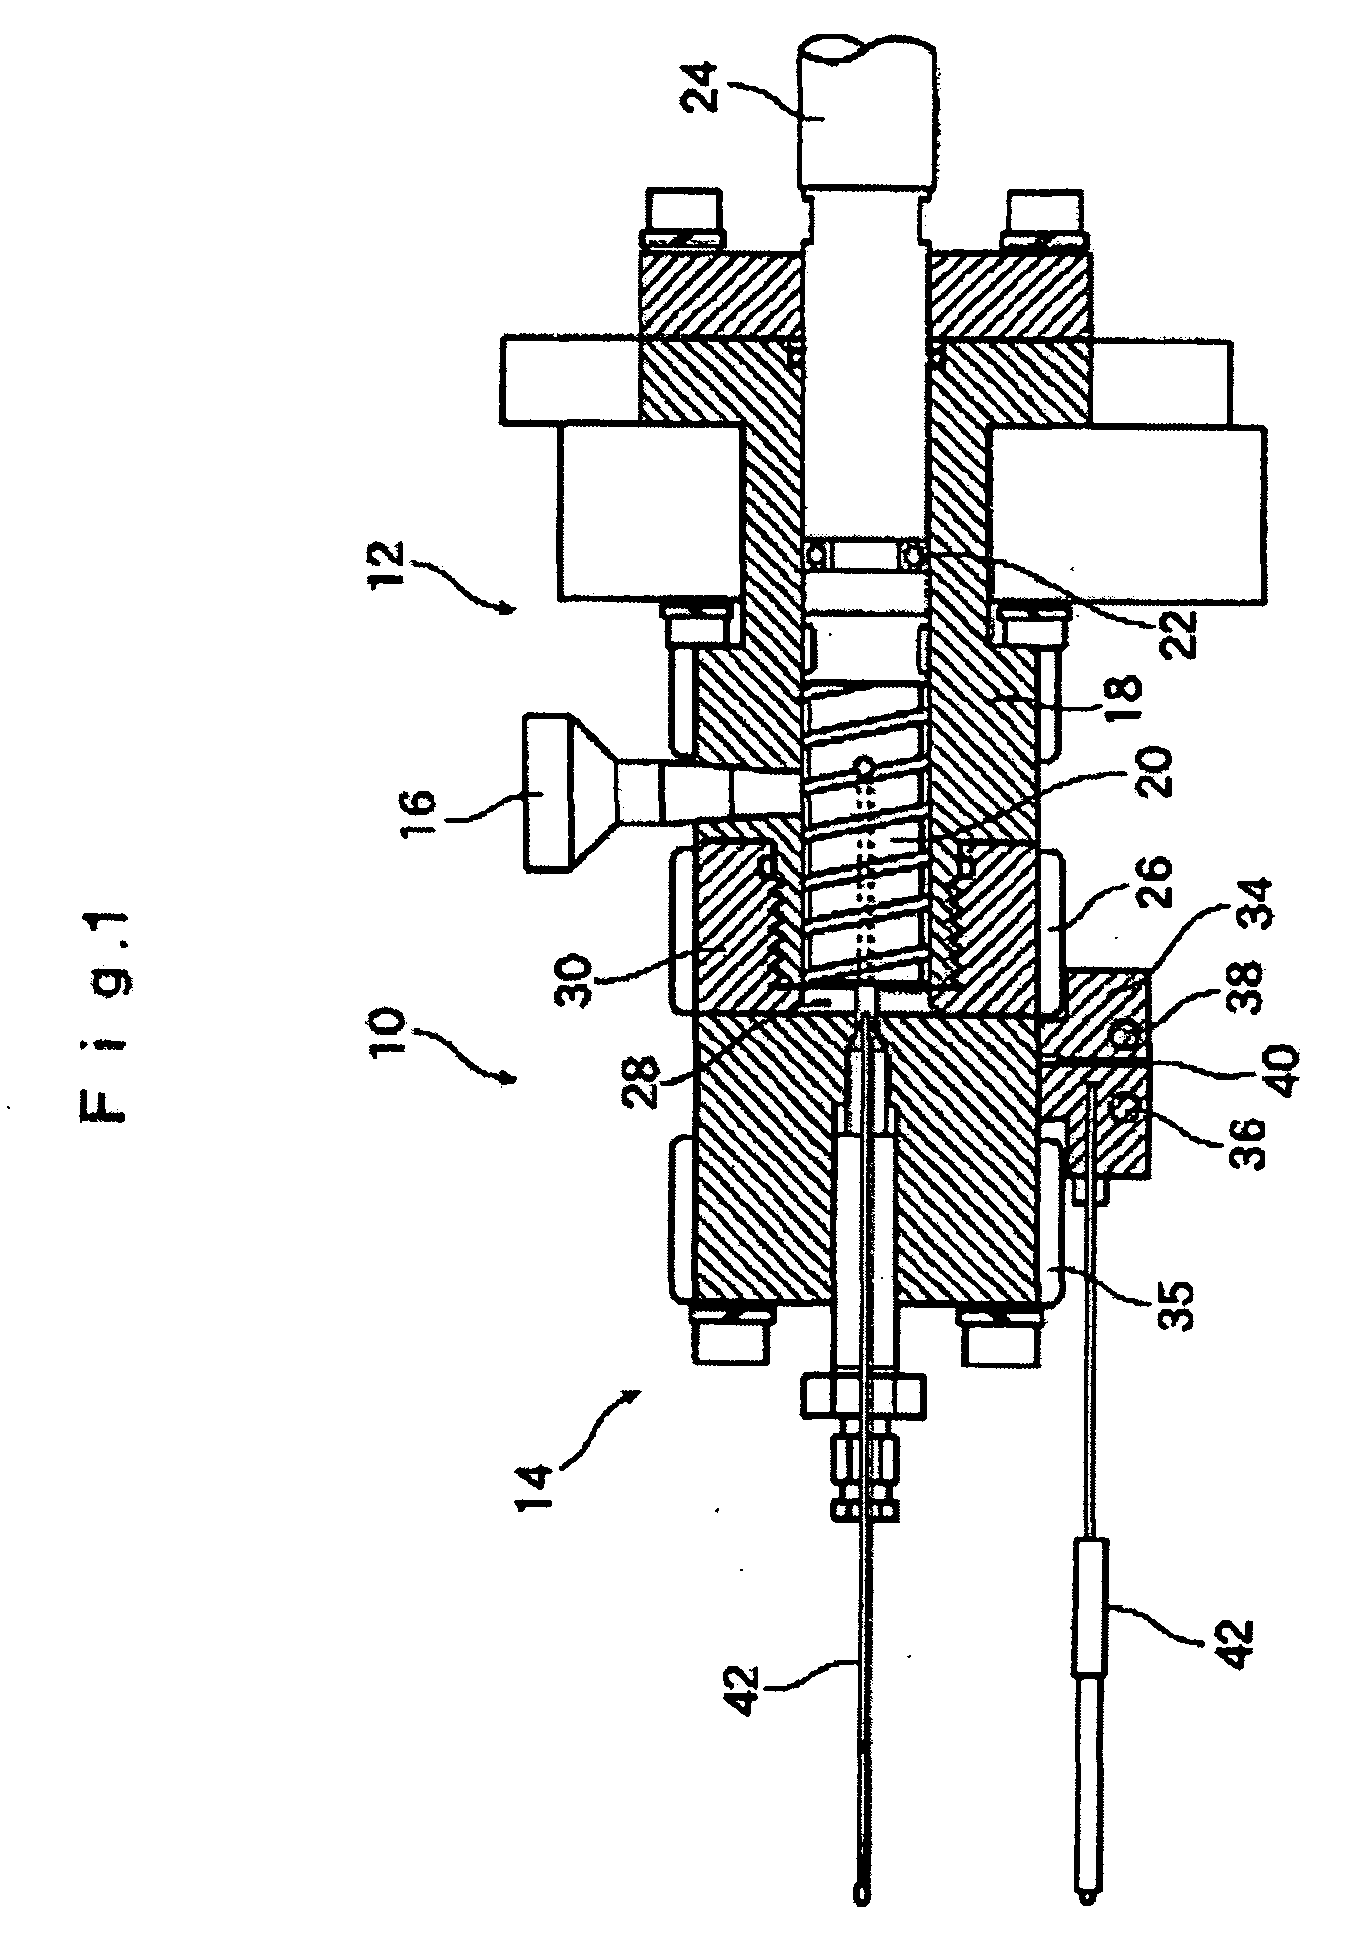 Melt-kneaded products, molded resin products, and production method thereof